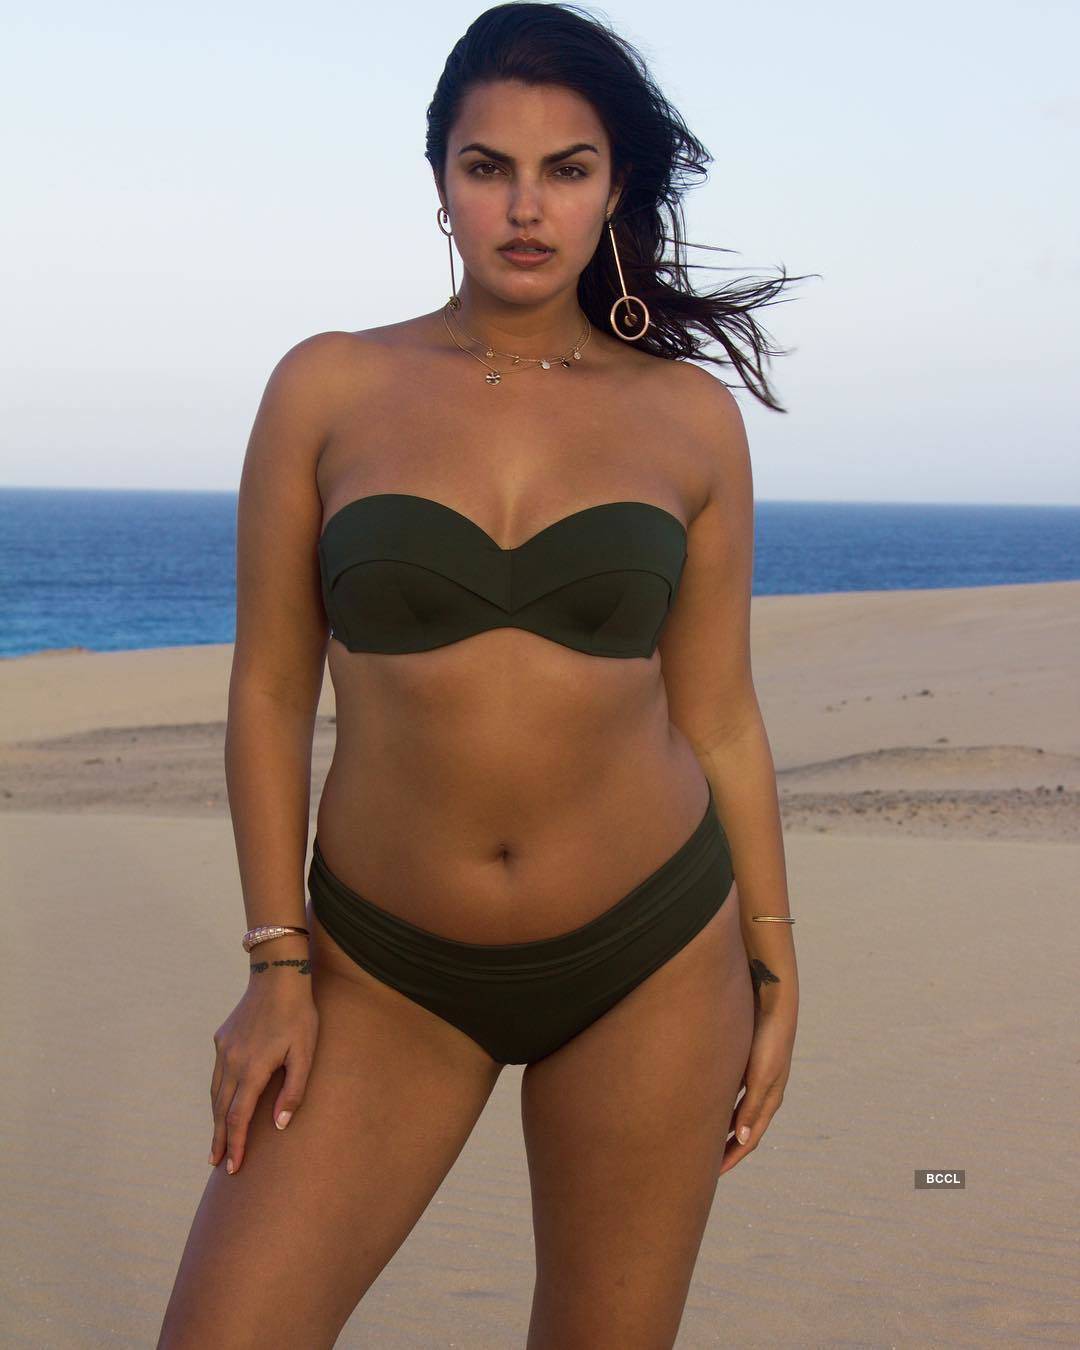 From curves to leaner built, Liza Golden-Bhojwani knows how win her followers